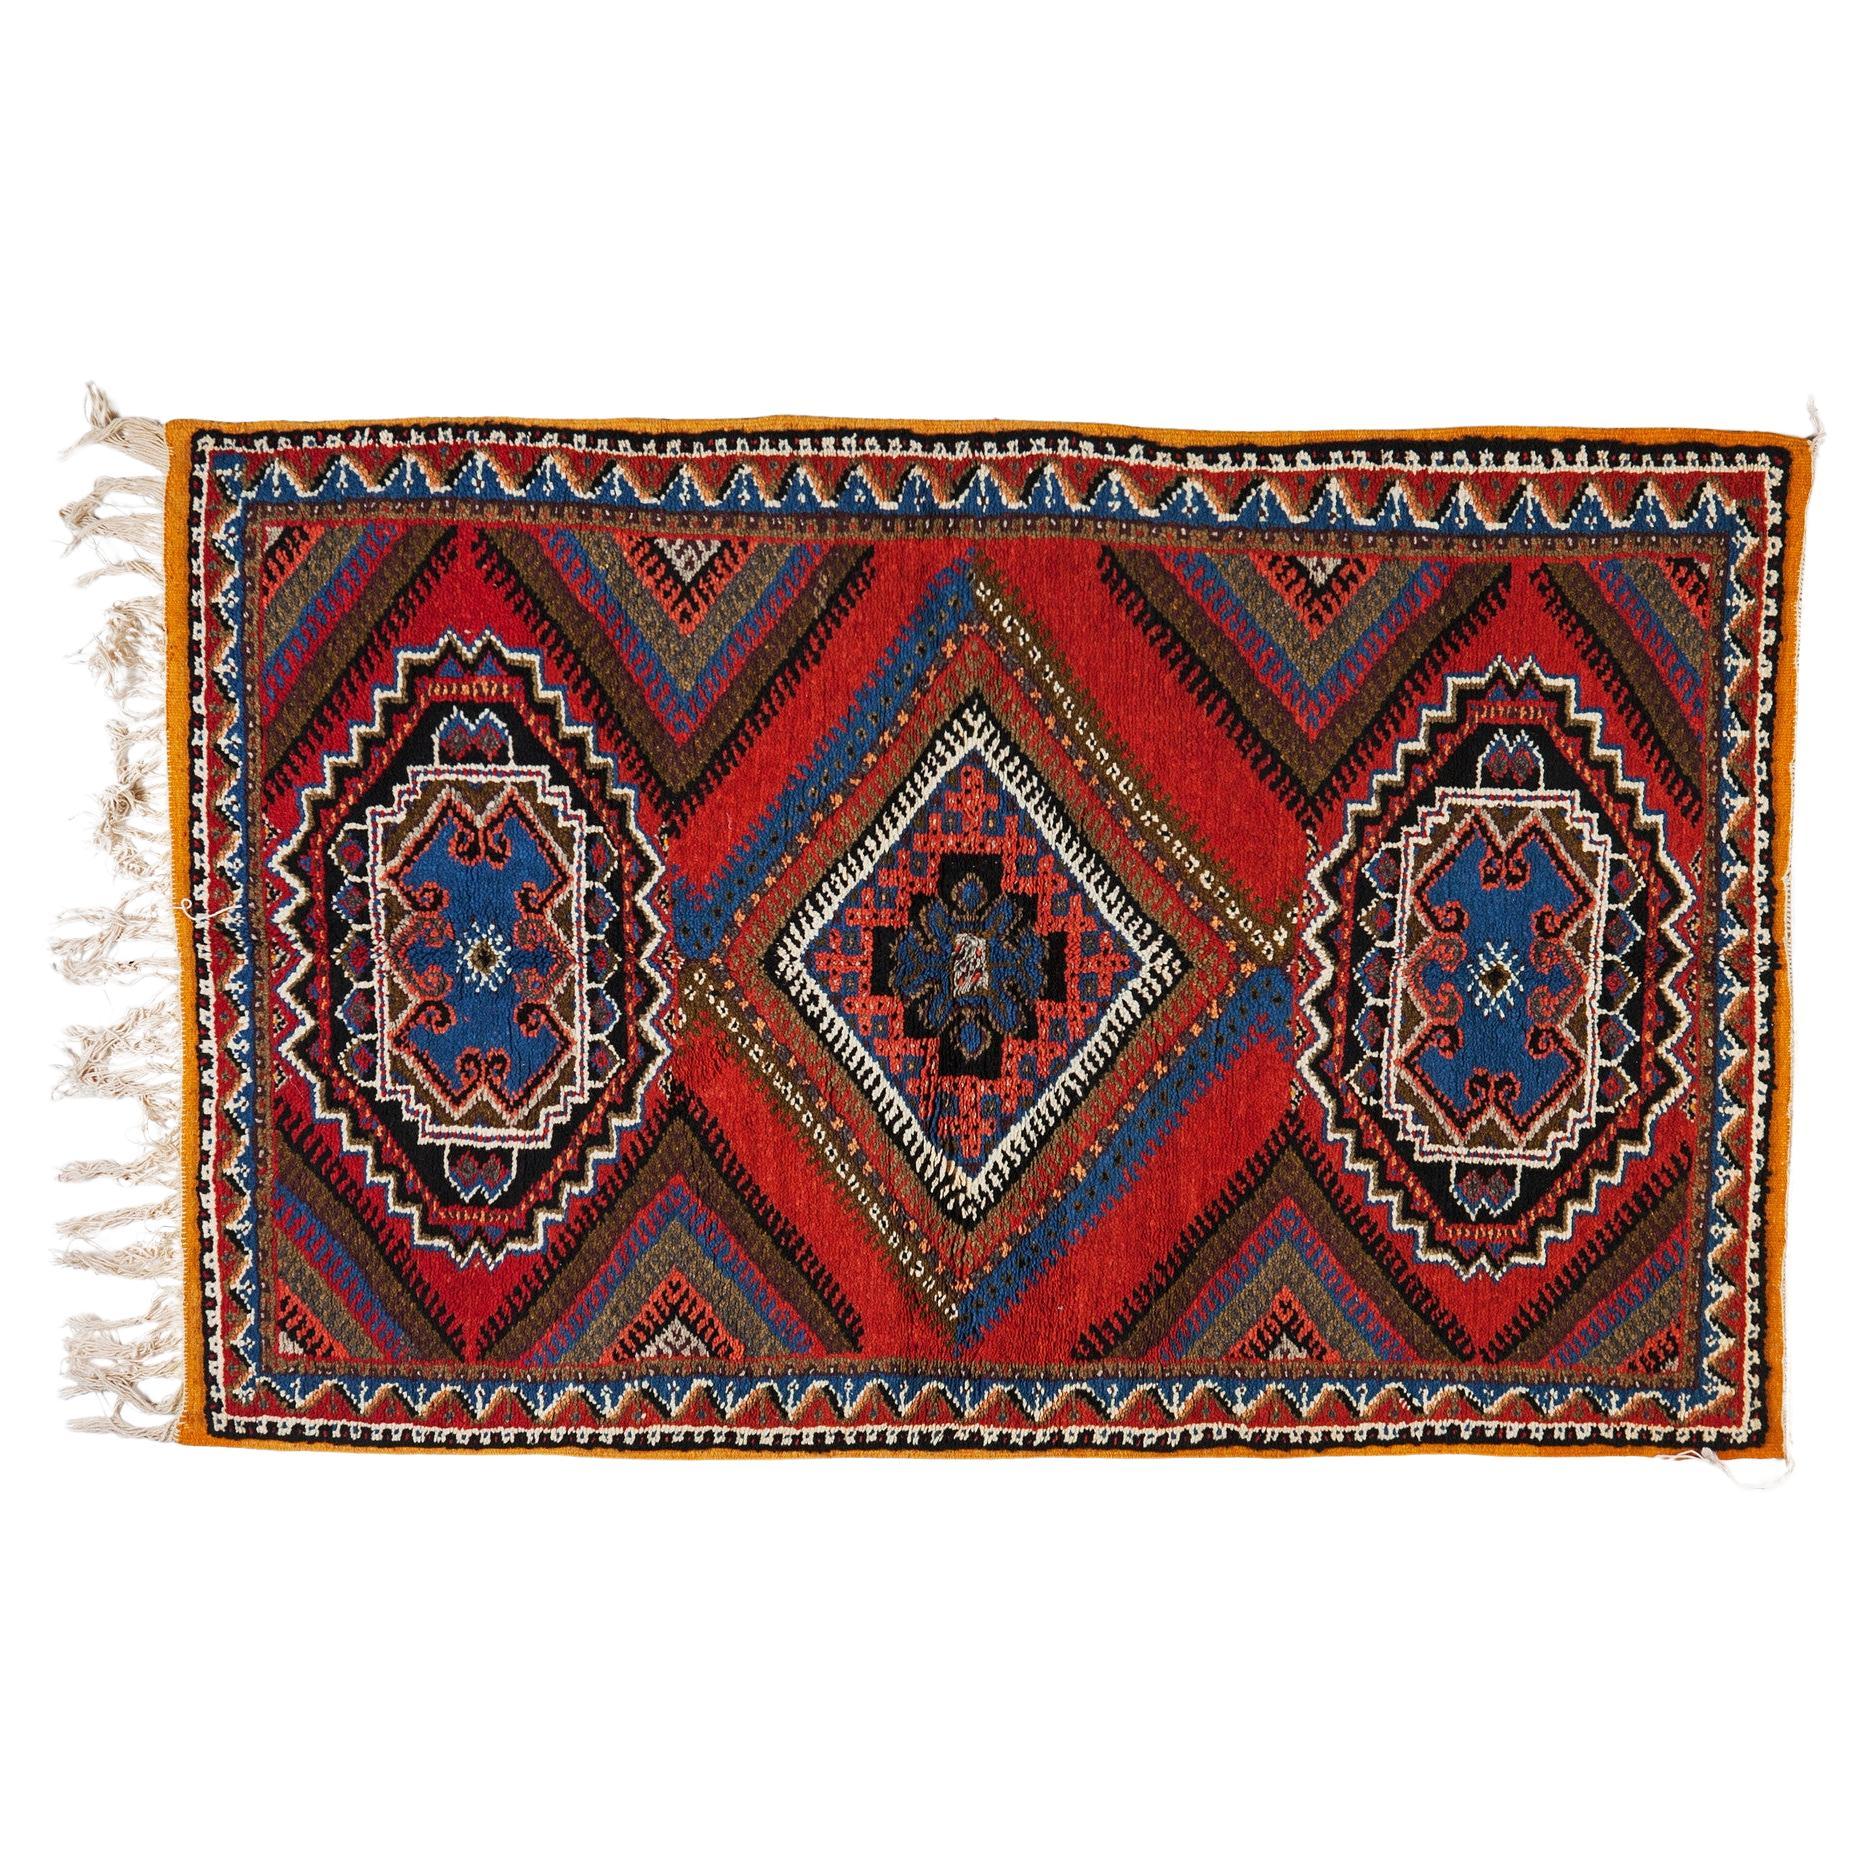 What are Moroccan rugs called?